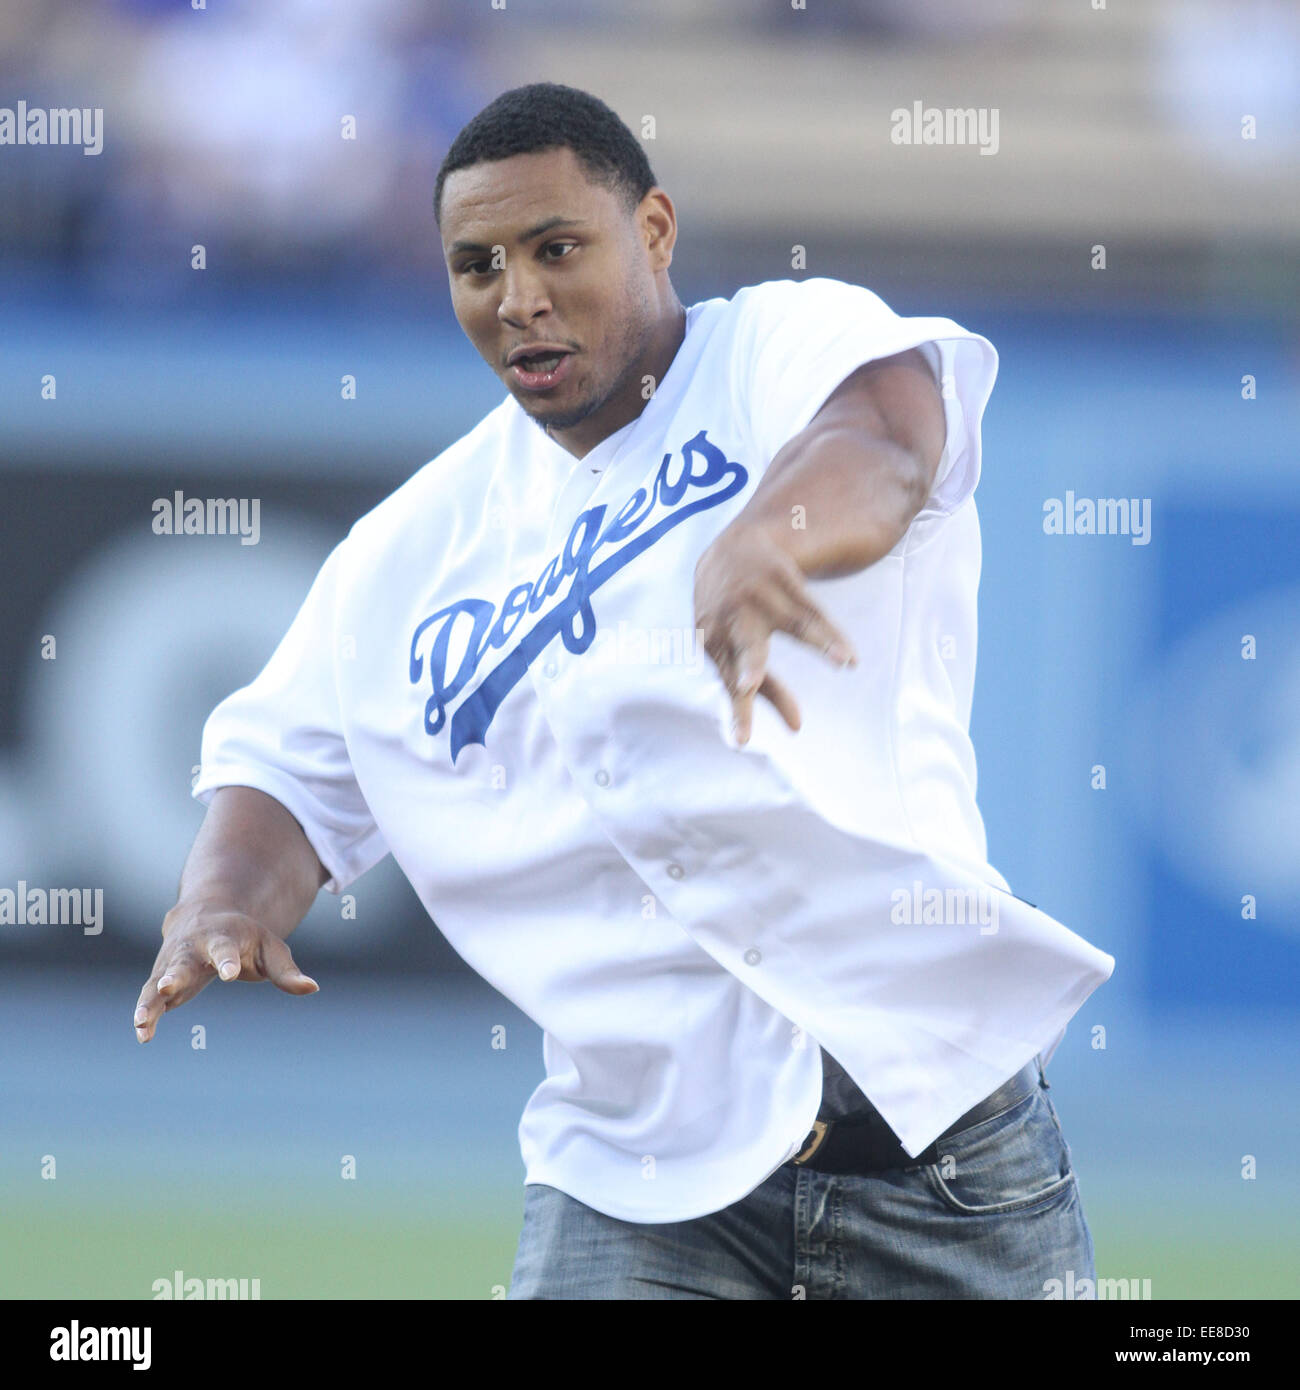 Celebrities attend a Los Angeles Dodgers v San Diego Padres game at Dodger Stadium in Los Angeles. The Padres defeated the Dodgers 6-3.  Featuring: Malcolm Smith Where: Los Angeles, California, United States When: 12 Jul 2014 Stock Photo